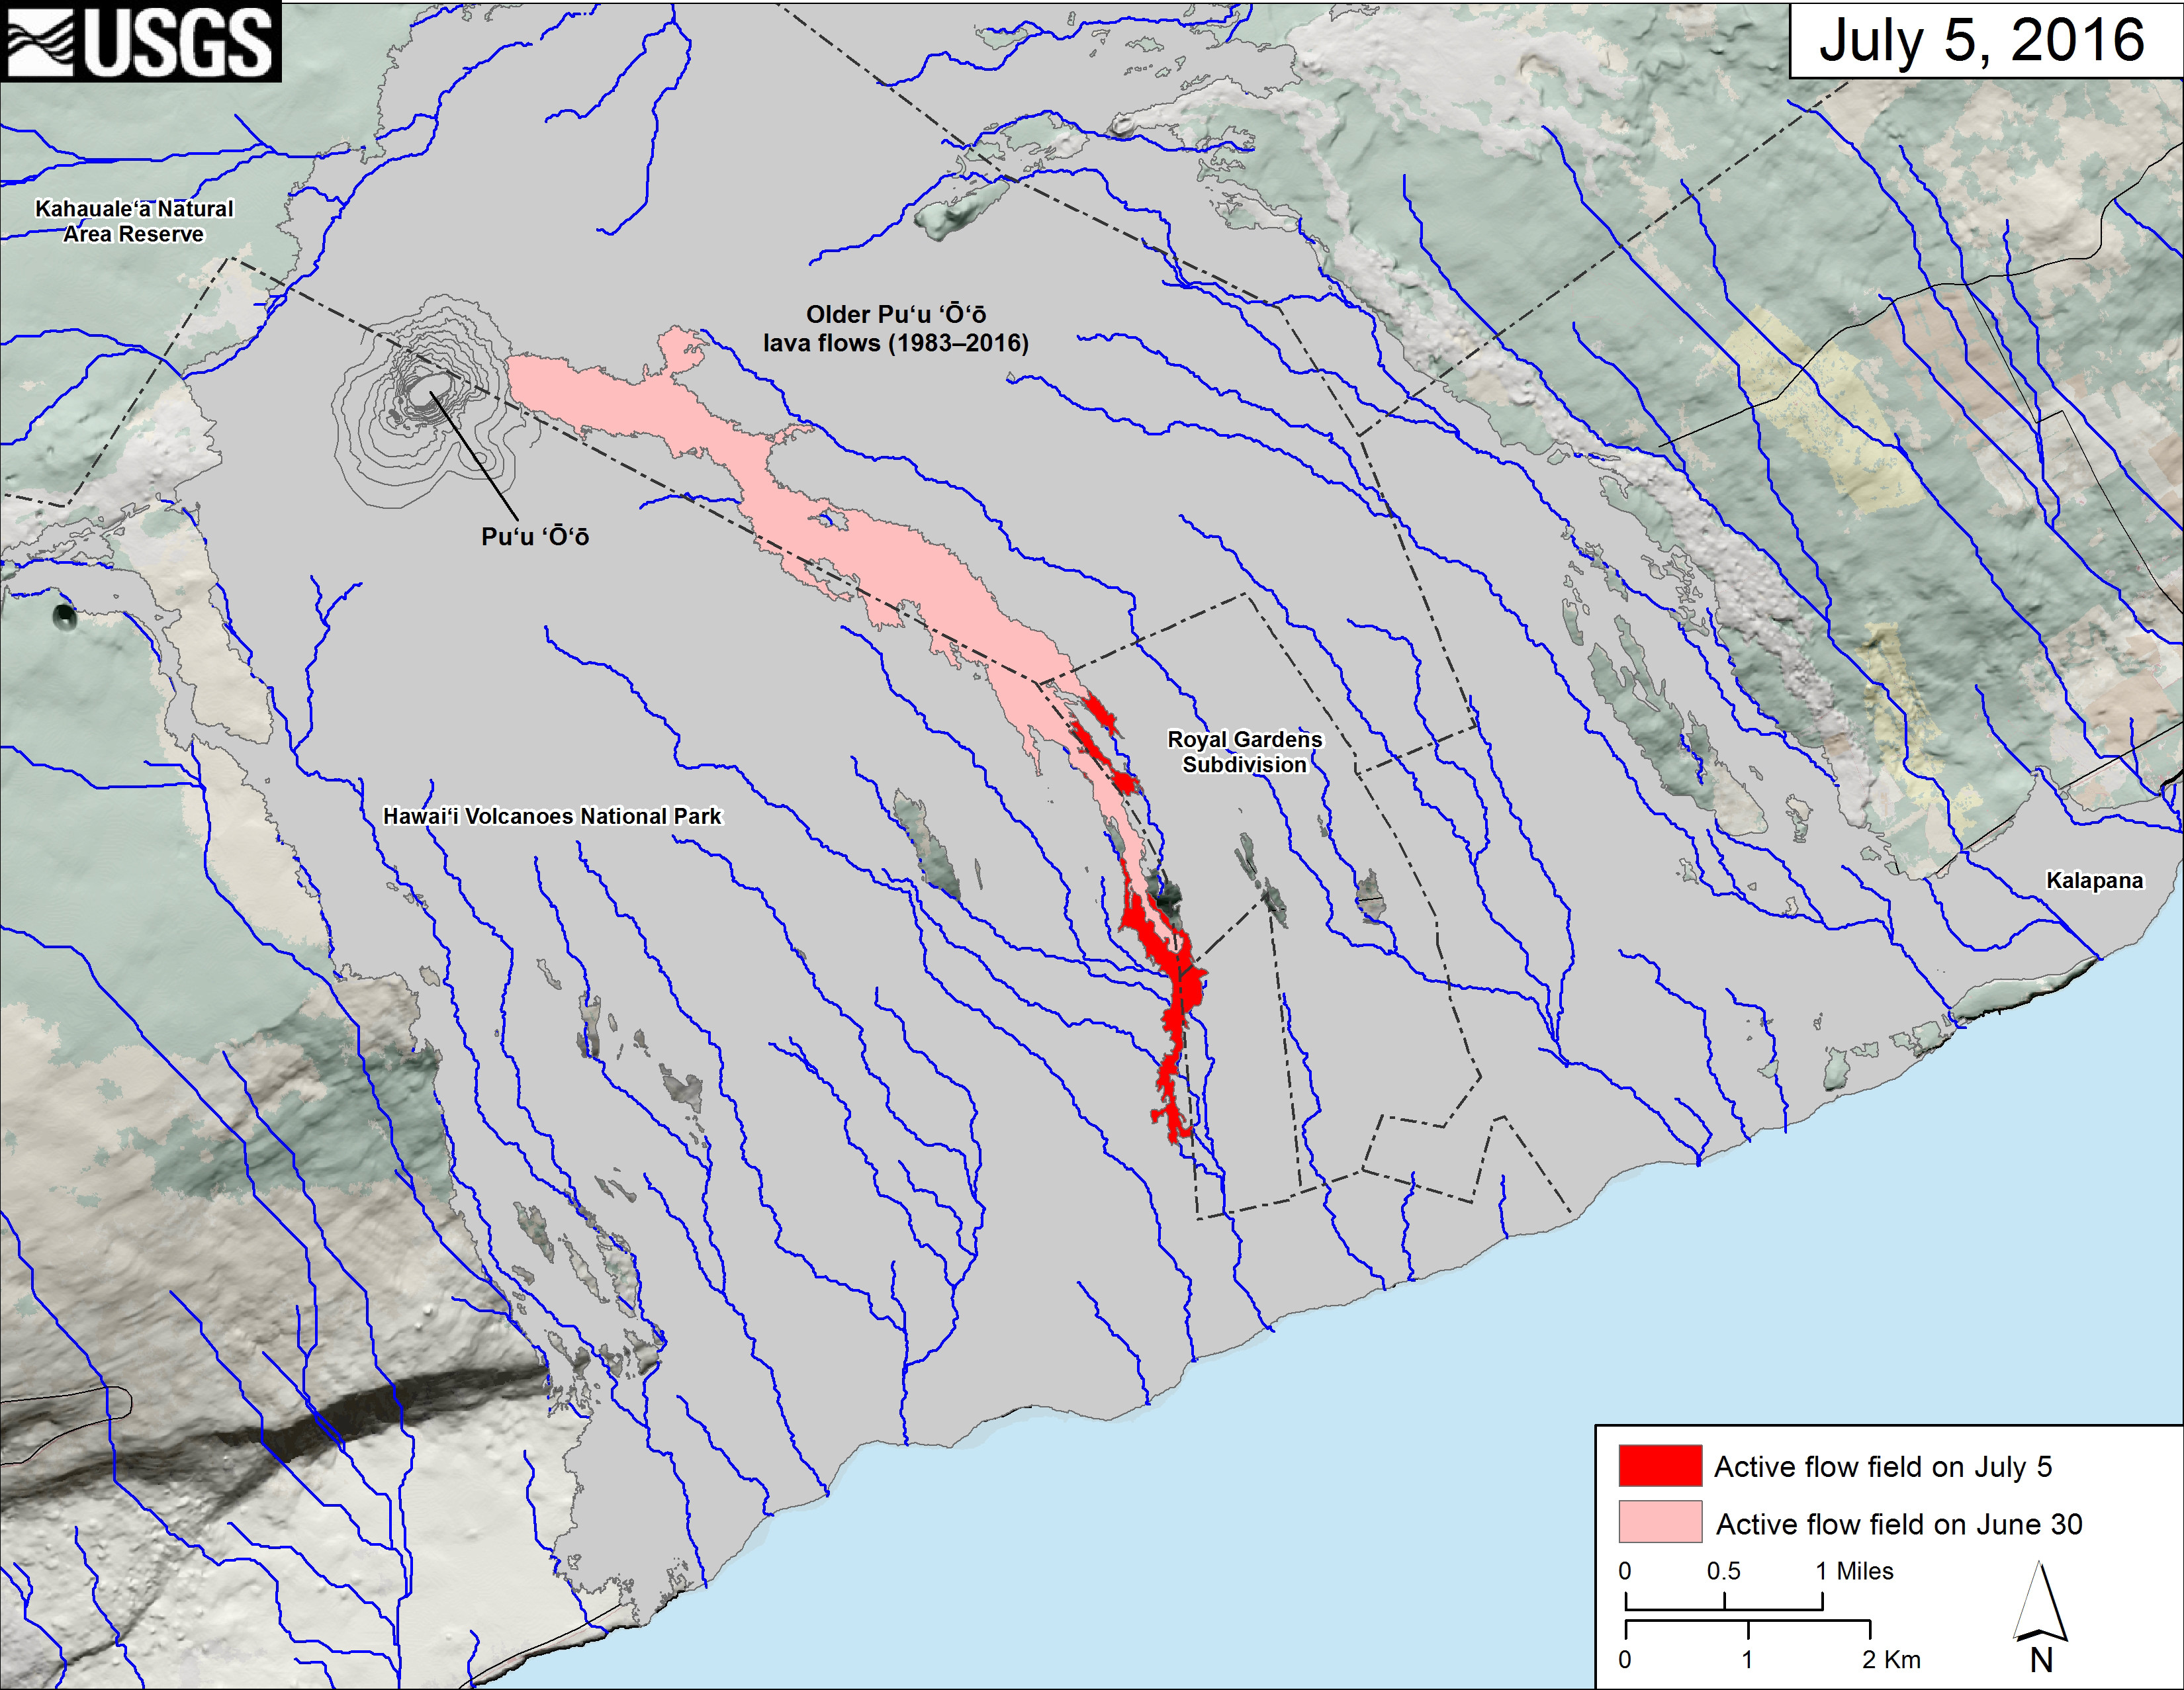 USGS MAP: This small-scale map shows Kīlauea’s active East Rift Zone lava flow field in relation to the southeastern part of the Island of Hawaiʻi. The area of the active flow field on June 30 is shown in pink, while widening and advancement of the active flow field as mapped on July 5 is shown in red. Older Puʻu ʻŌʻō lava flows (1983–2016) are shown in gray.